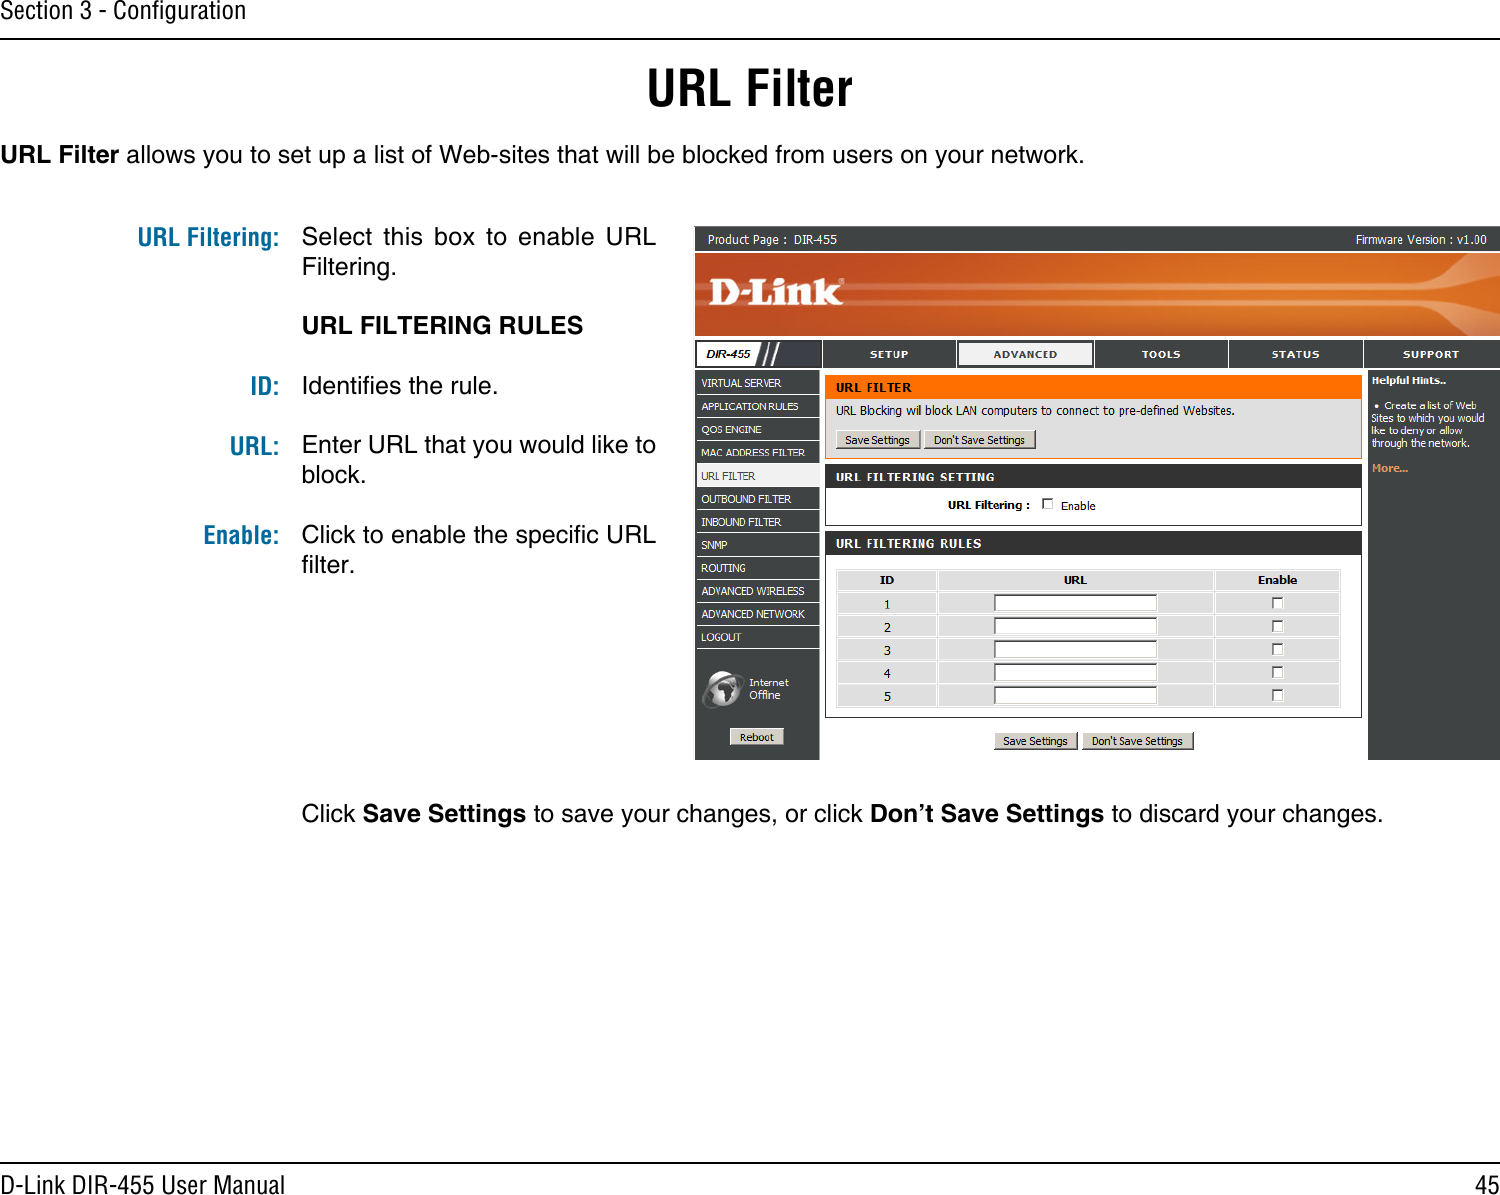 45D-Link DIR-455 User ManualSection 3 - ConﬁgurationSelect  this  box  to  enable  URL Filtering.URL FILTERING RULESIdenties the rule.Enter URL that you would like to block.Click to enable the specic URL lter.URL Filter allows you to set up a list of Web-sites that will be blocked from users on your network.URL FilterClick Save Settings to save your changes, or click Don’t Save Settings to discard your changes.URL Filtering: ID:URL: Enable: